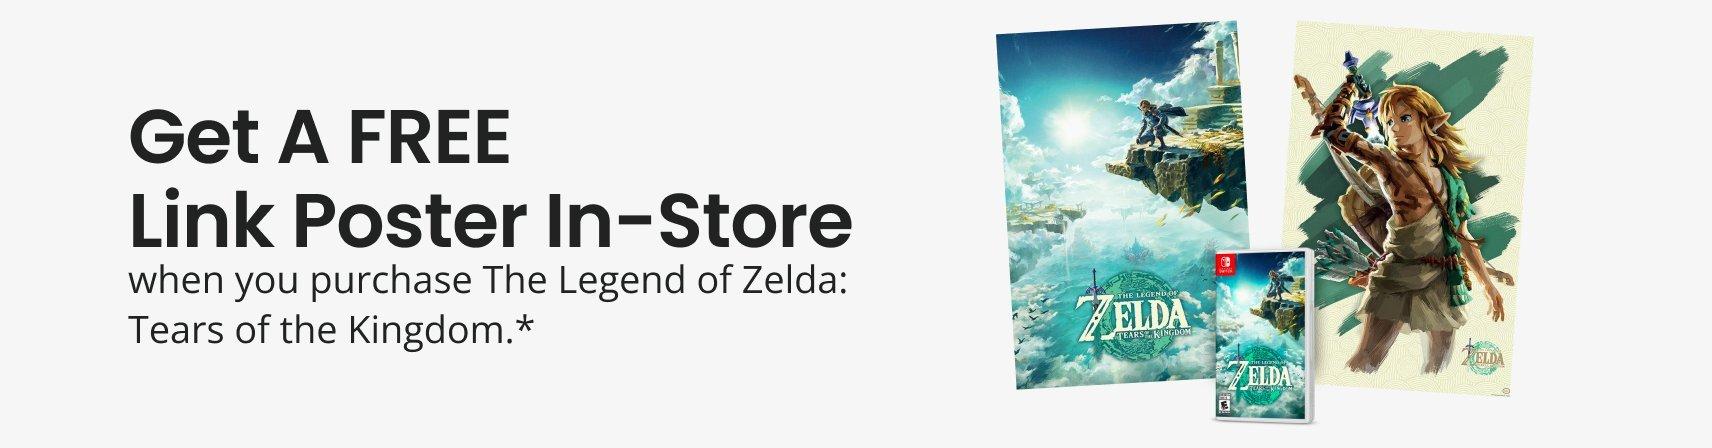 Get A Free Zelda Poster When You Purchase The Legend of Zelda: Tears of the Kingdom